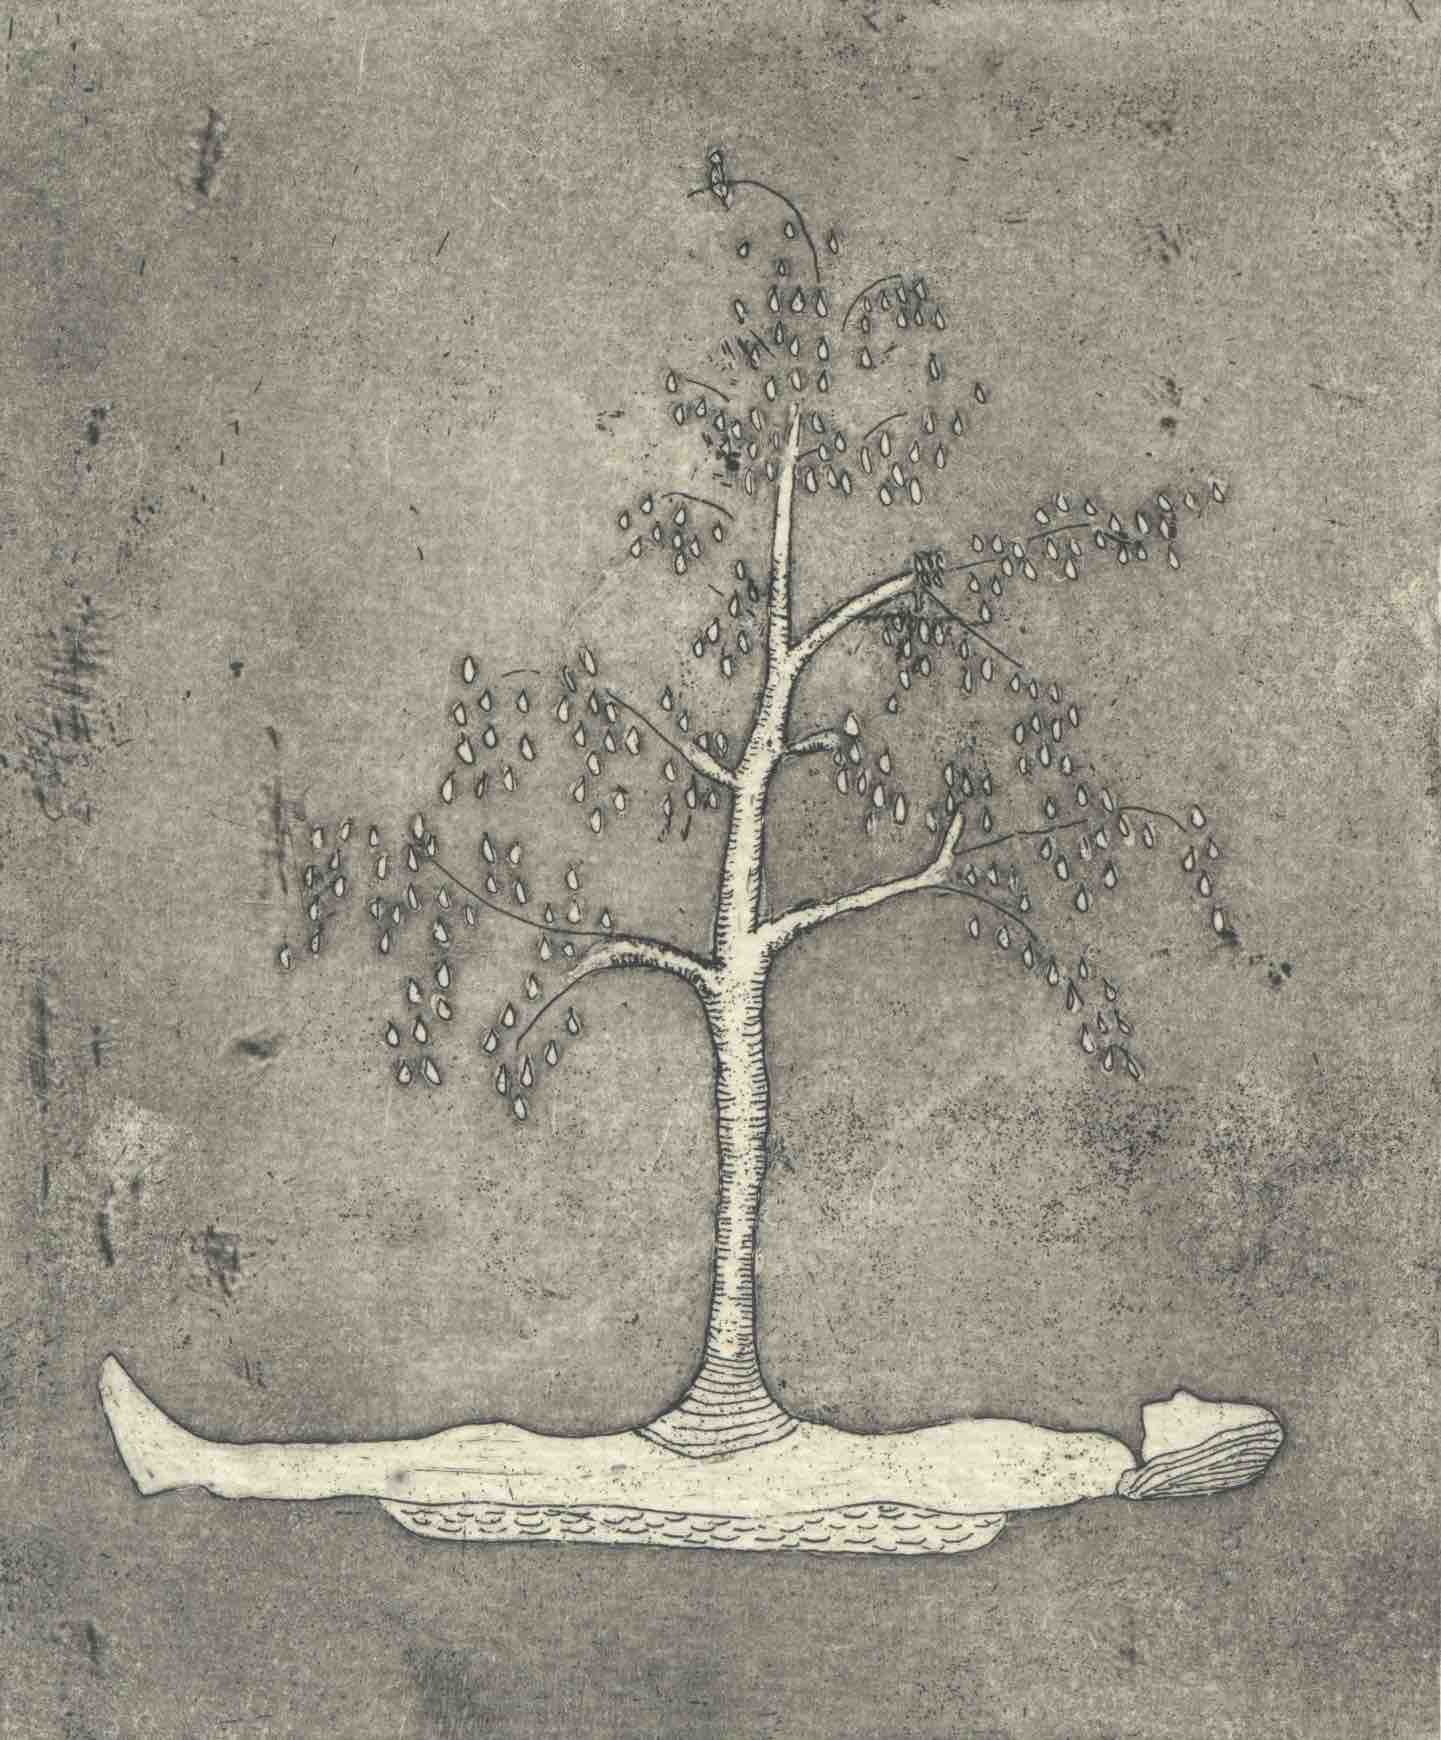 This etching is calm, peaceful. On a simple grey background, we see the body of a woman from the side, simple and white, lying on the ground. Her face is featureless. Below her is a pool of water, indicated by small lines of waves. Growing from her stomach is a young tree, with white teardrop leaves delicately framing each of its branches.